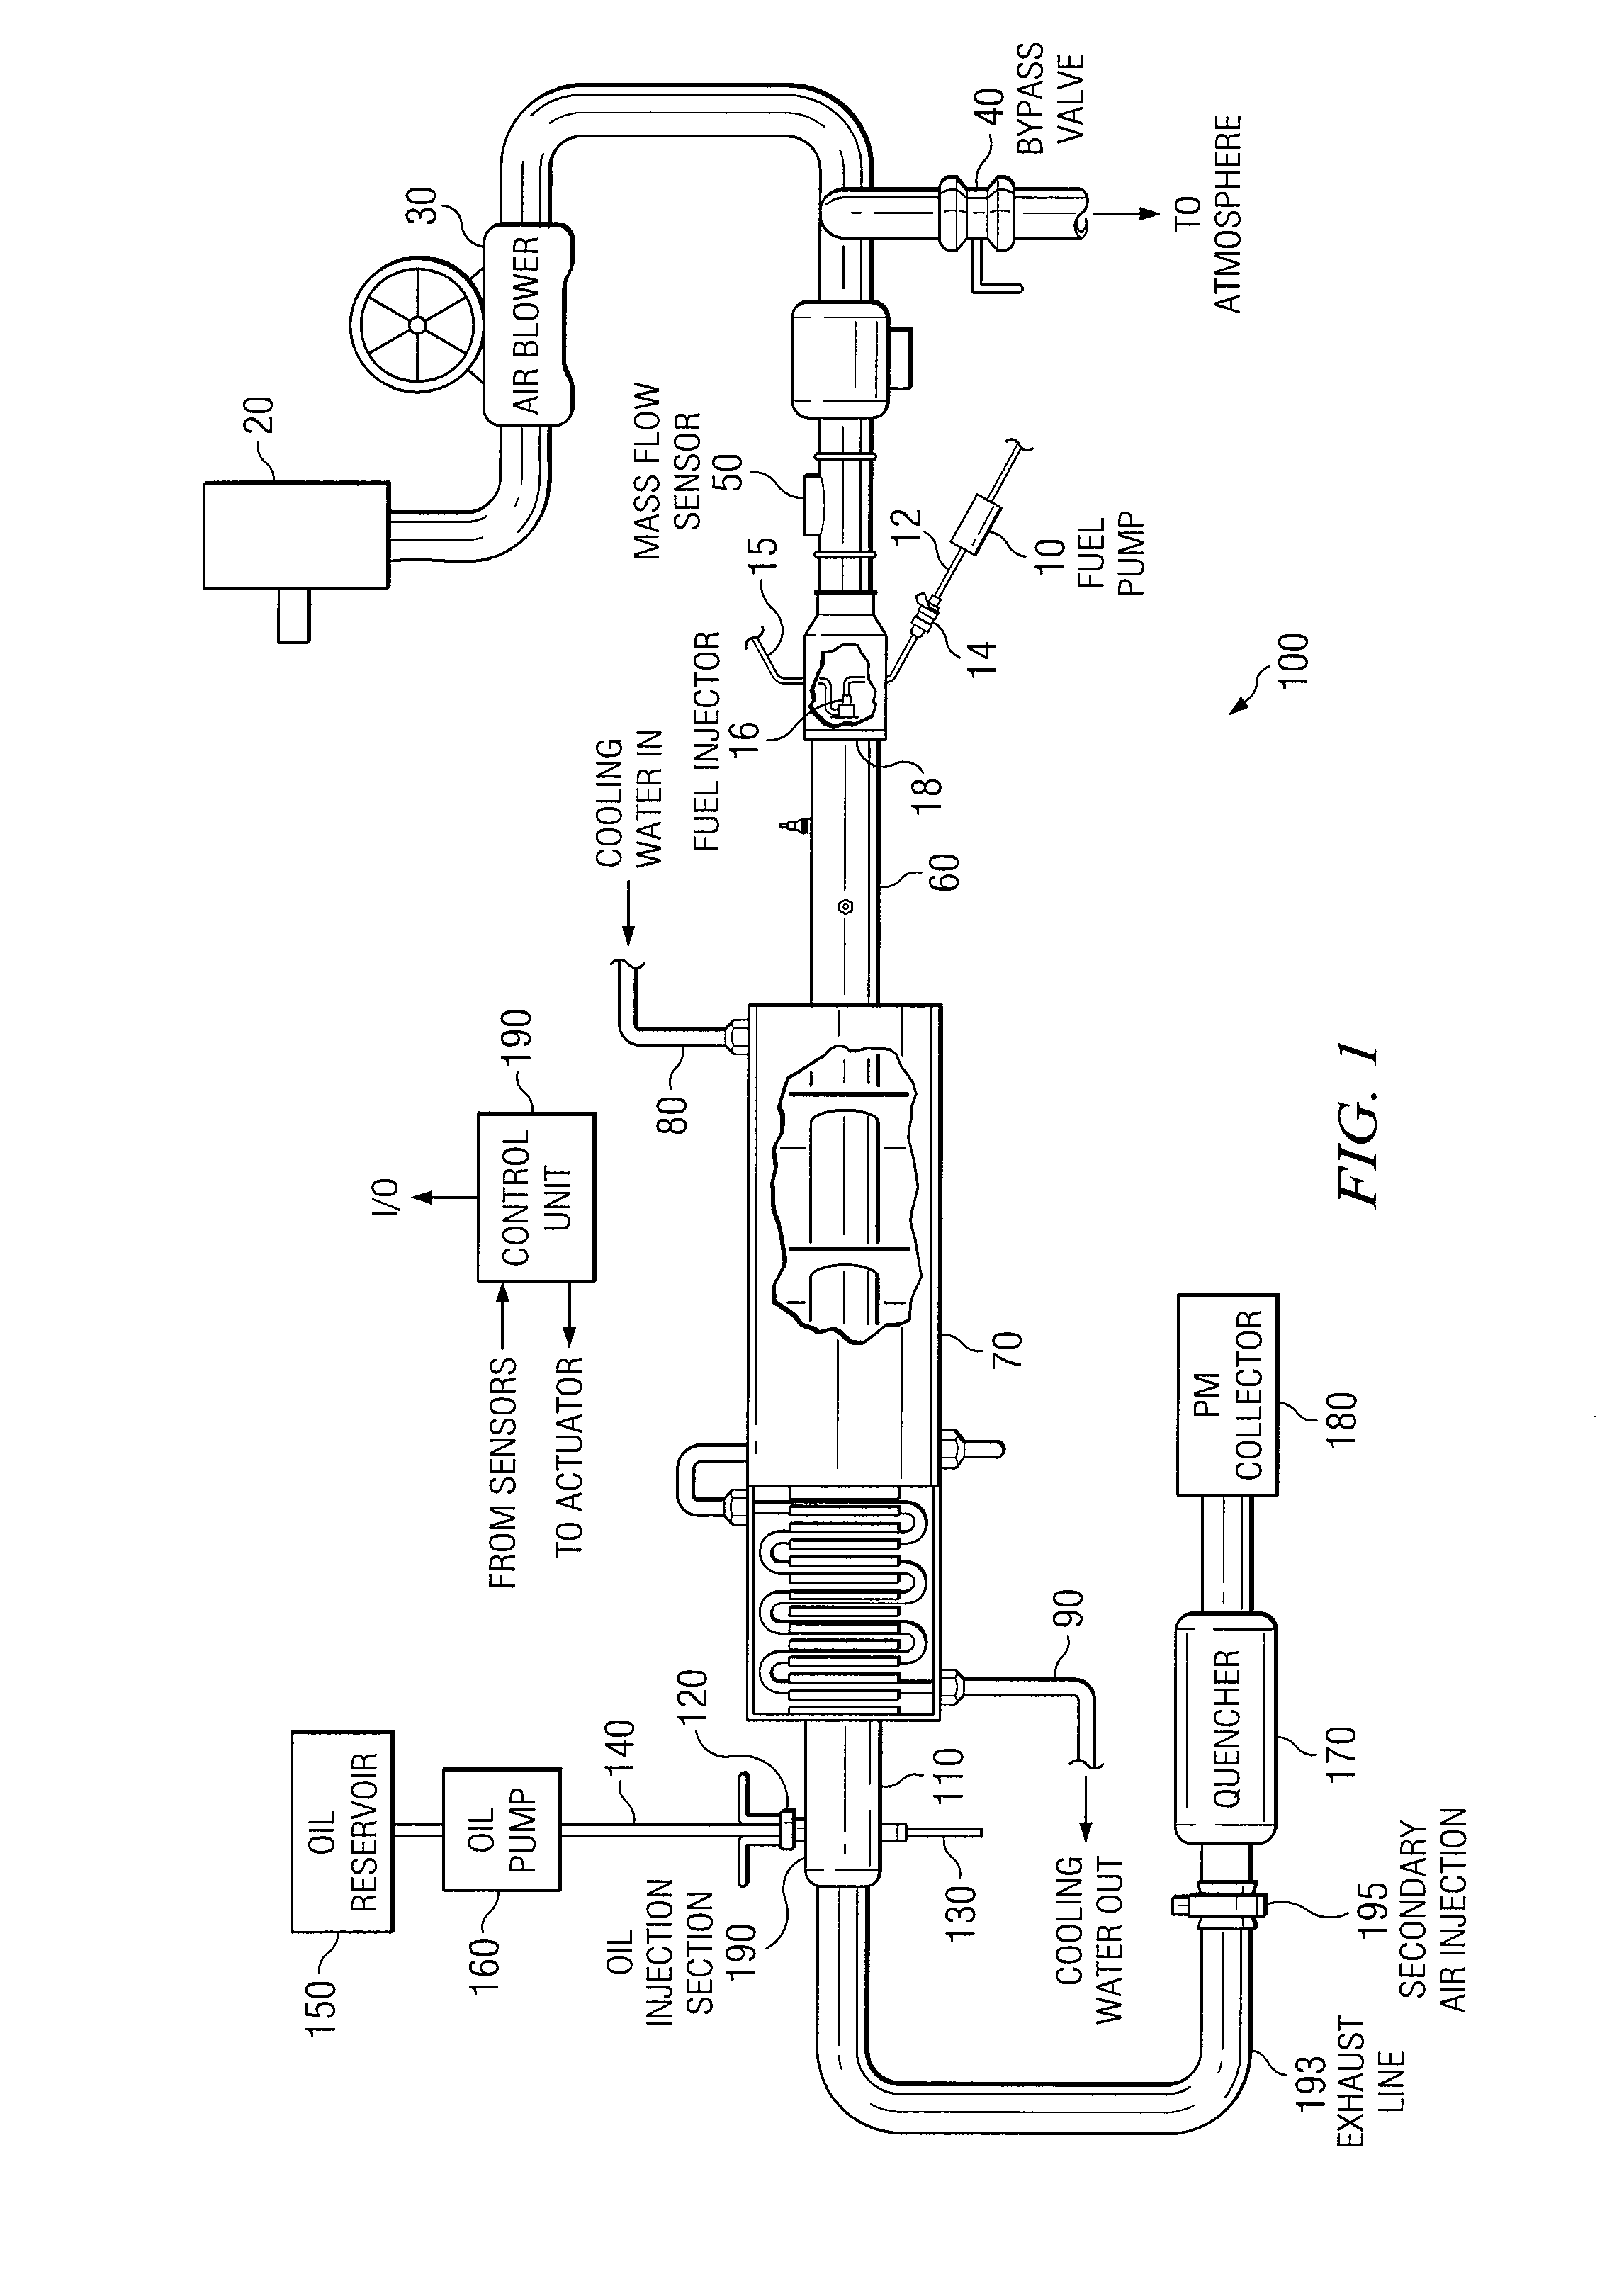 System and method for producing diesel exhaust for testing diesel engine aftertreatment devices